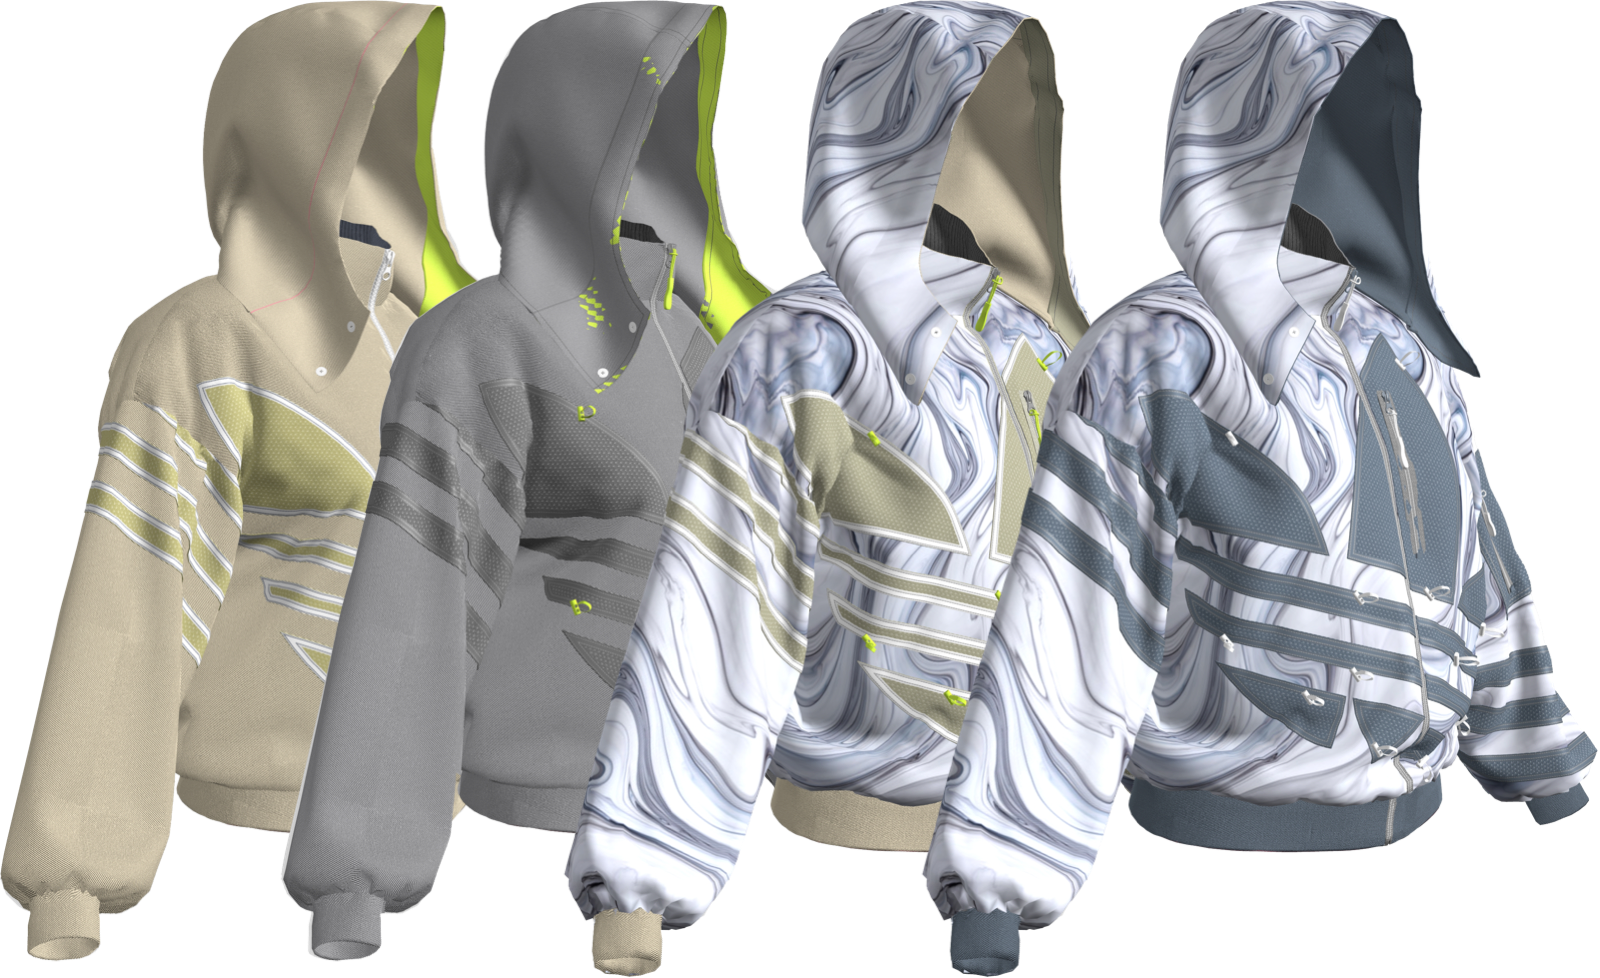 A set of 3D virtual prototypes of the iconic Adidas jumpsuit. 